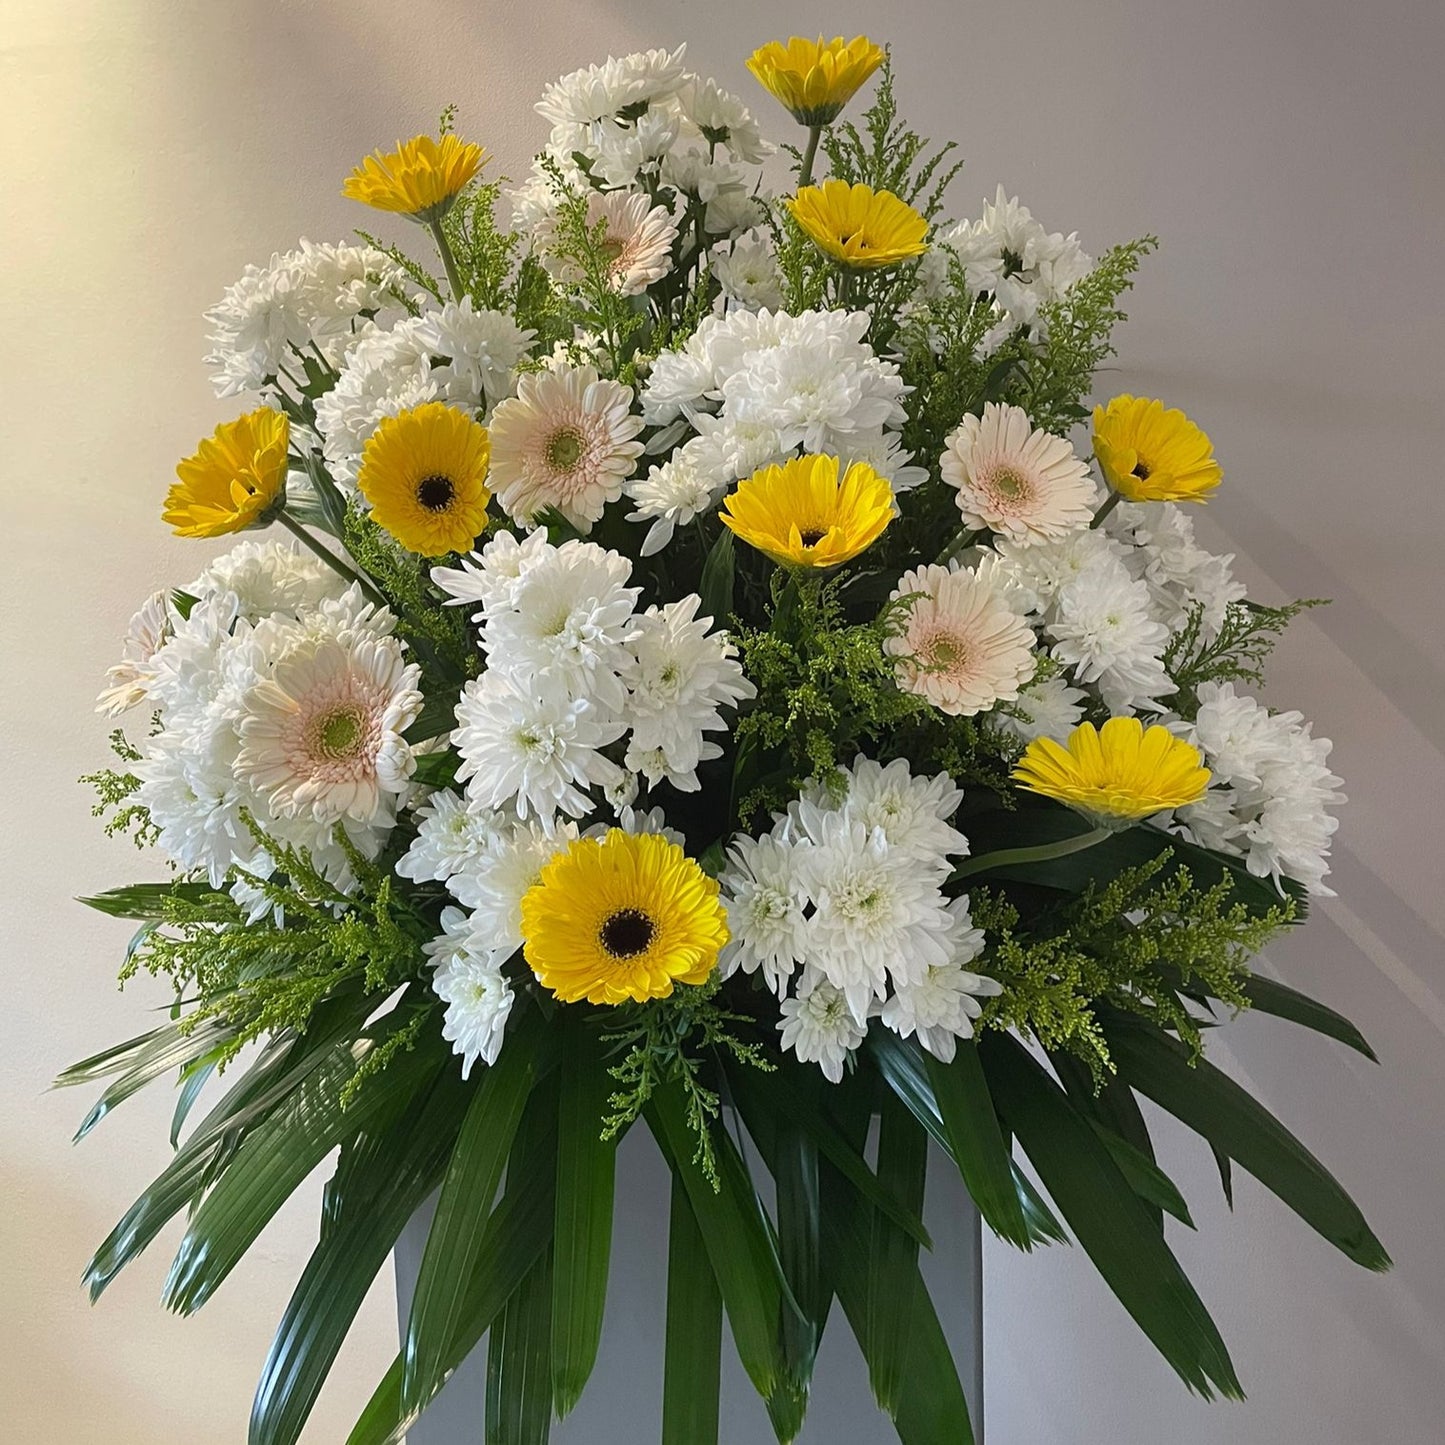 Real Fresh Mums and Gerbera Daisies Flower Condolences Floral Stand Under $100 in Singapore Free Delivery